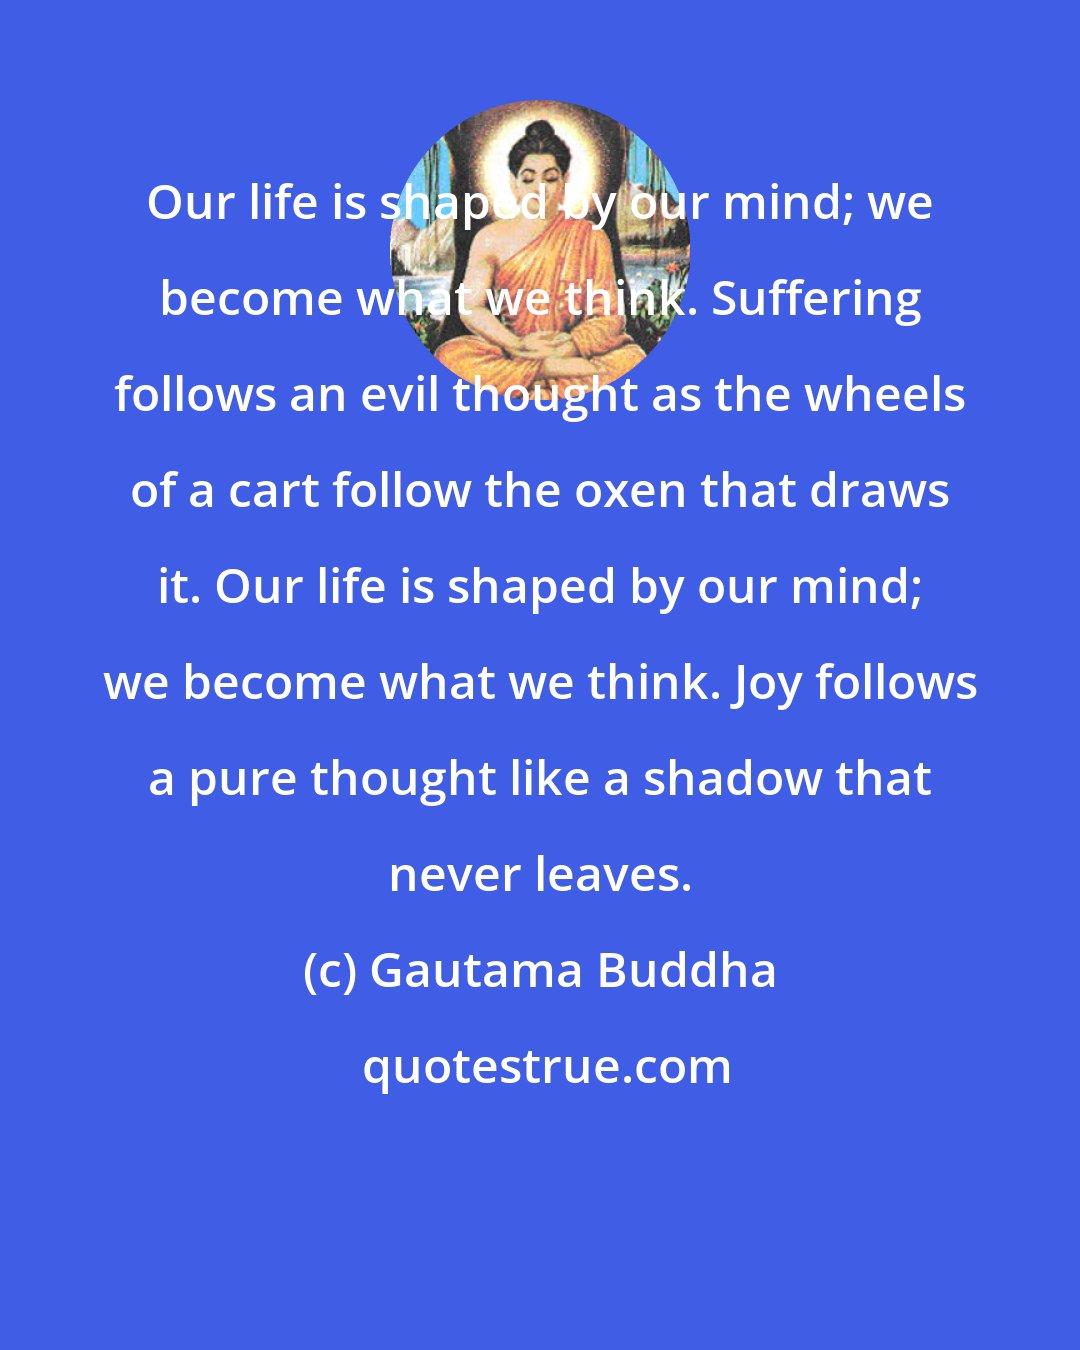 Gautama Buddha: Our life is shaped by our mind; we become what we think. Suffering follows an evil thought as the wheels of a cart follow the oxen that draws it. Our life is shaped by our mind; we become what we think. Joy follows a pure thought like a shadow that never leaves.